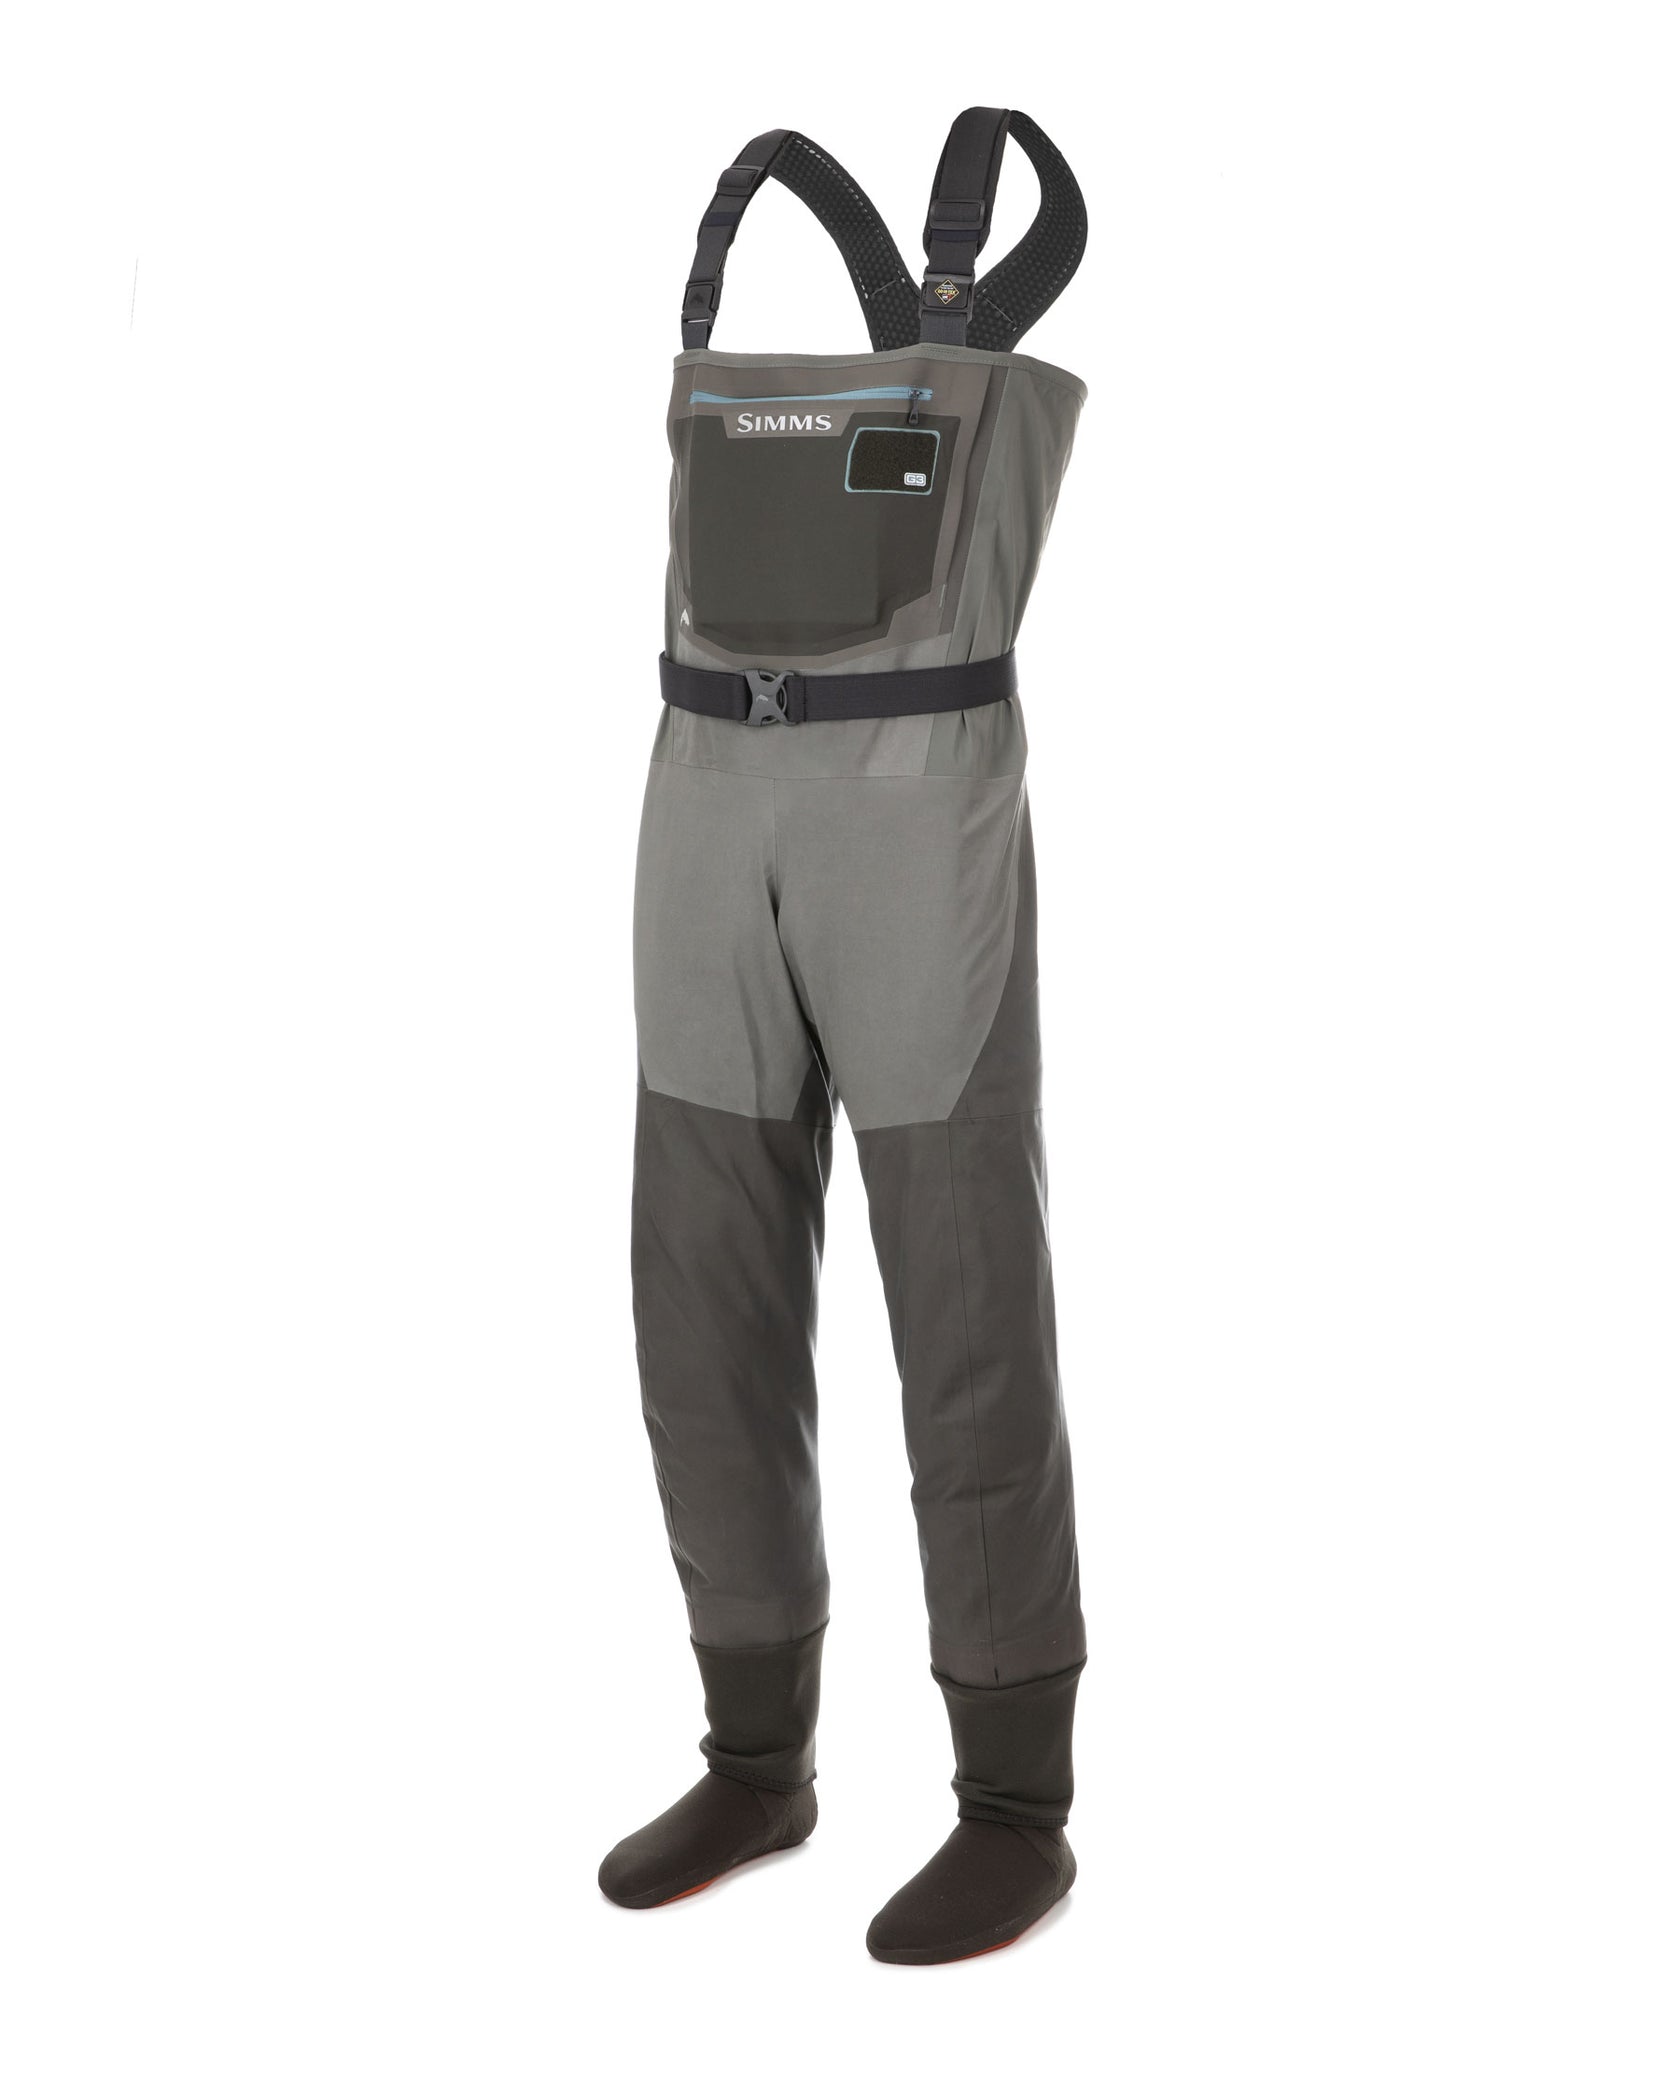 Simms W's G3 Guide Waders - LF (Large Full)